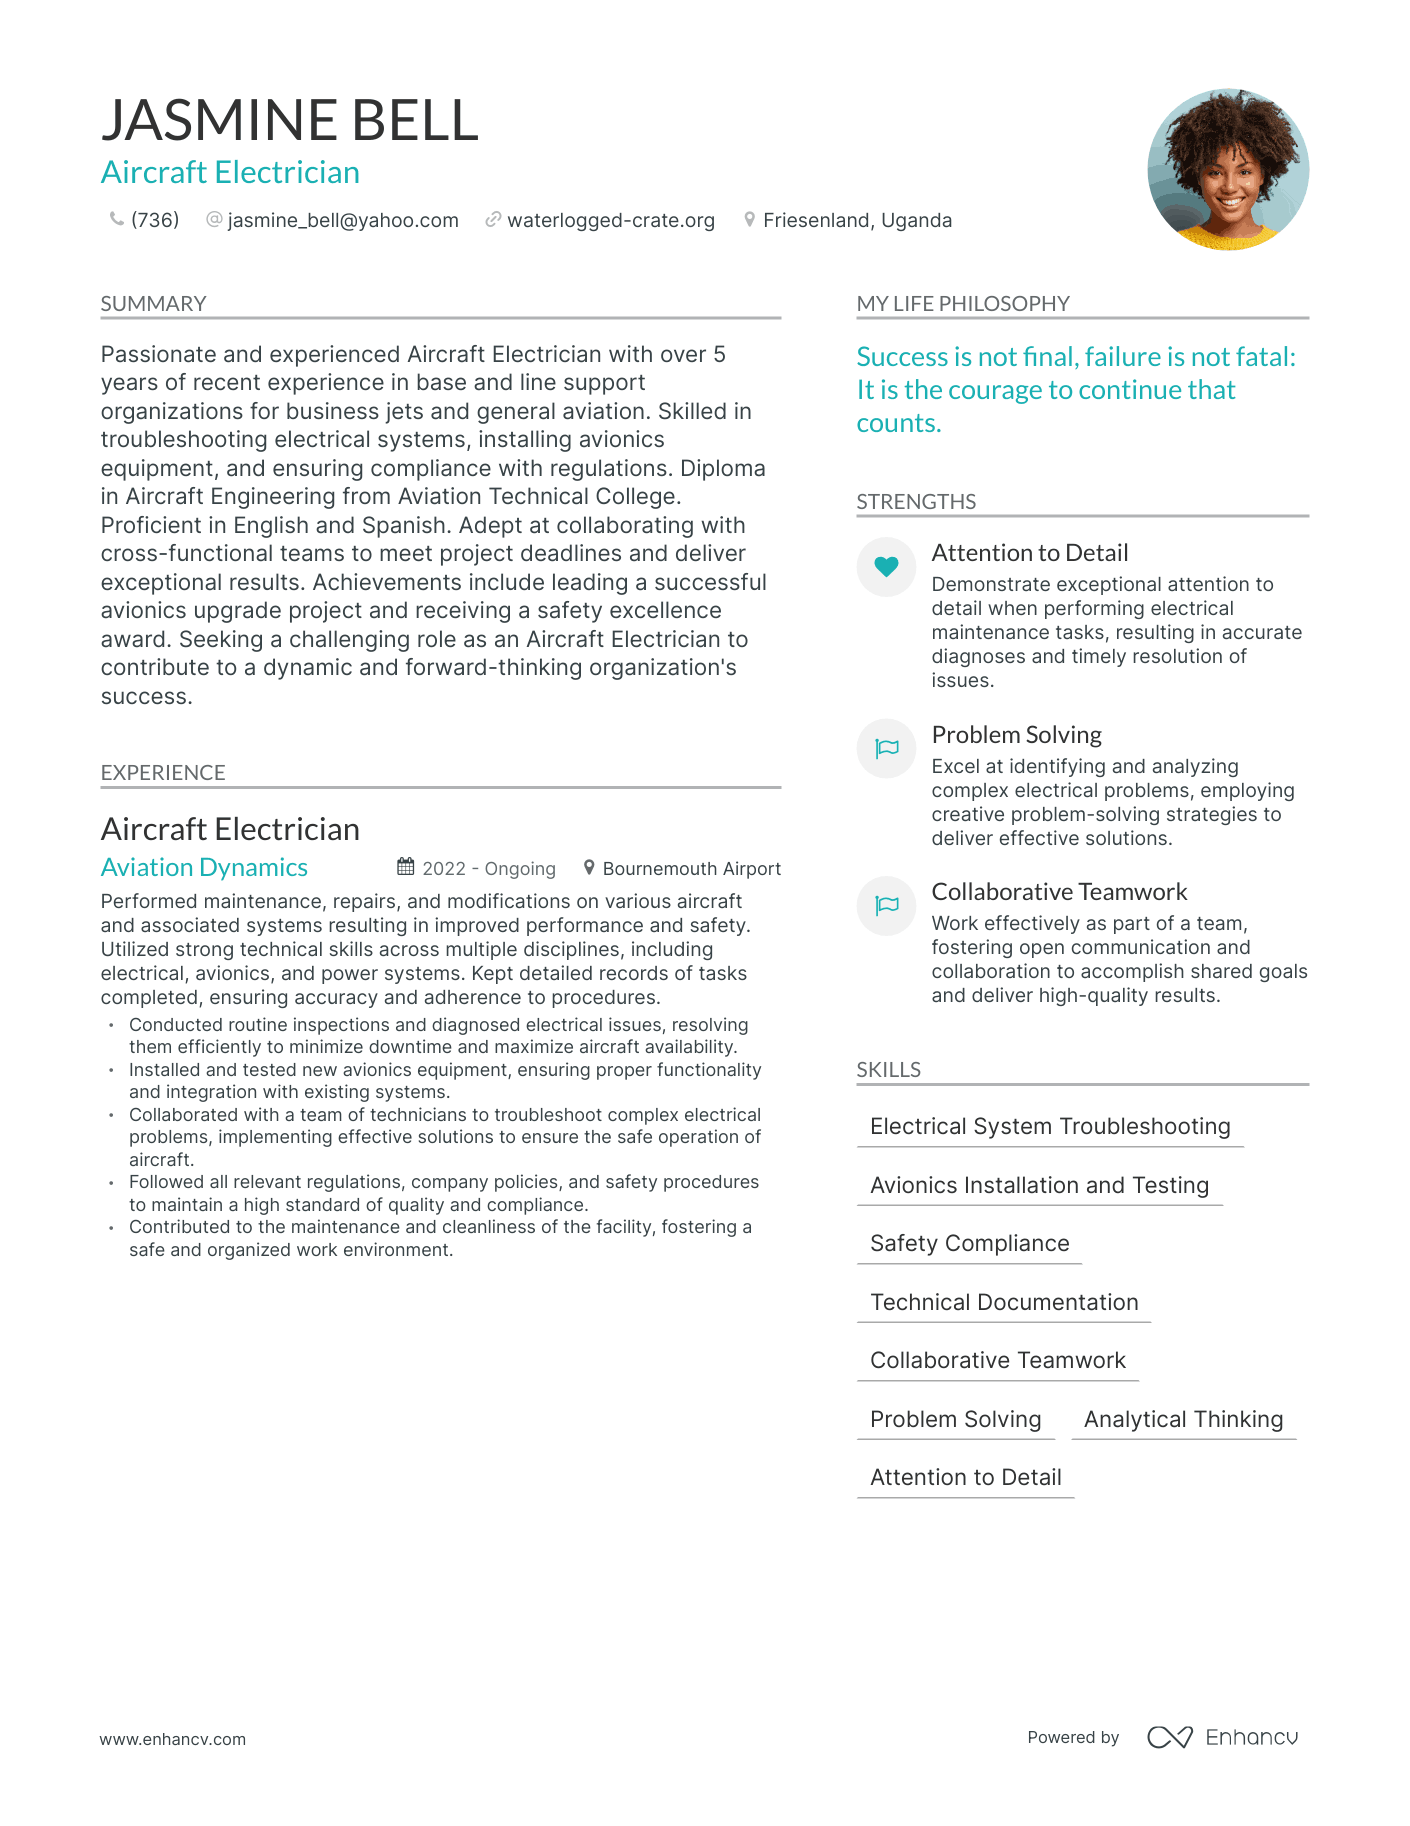 Aircraft Electrician resume example